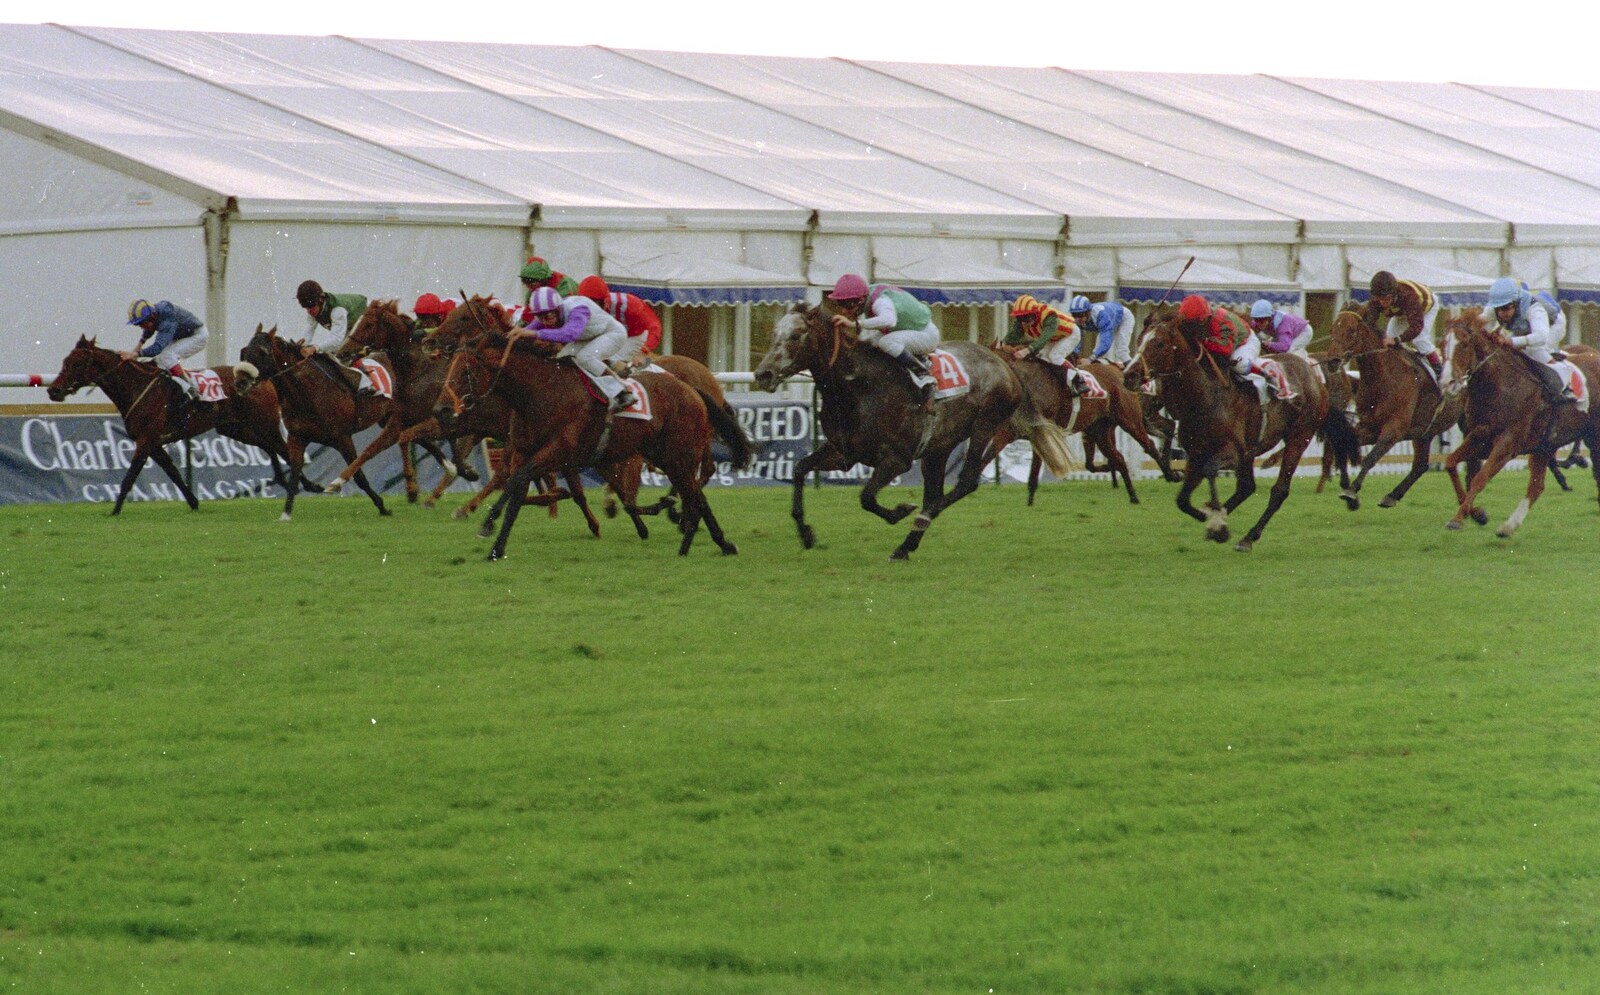 Horses thunder down the field from 3G Lab Goes to the Races, Newmarket, Suffolk - 15th July 2001